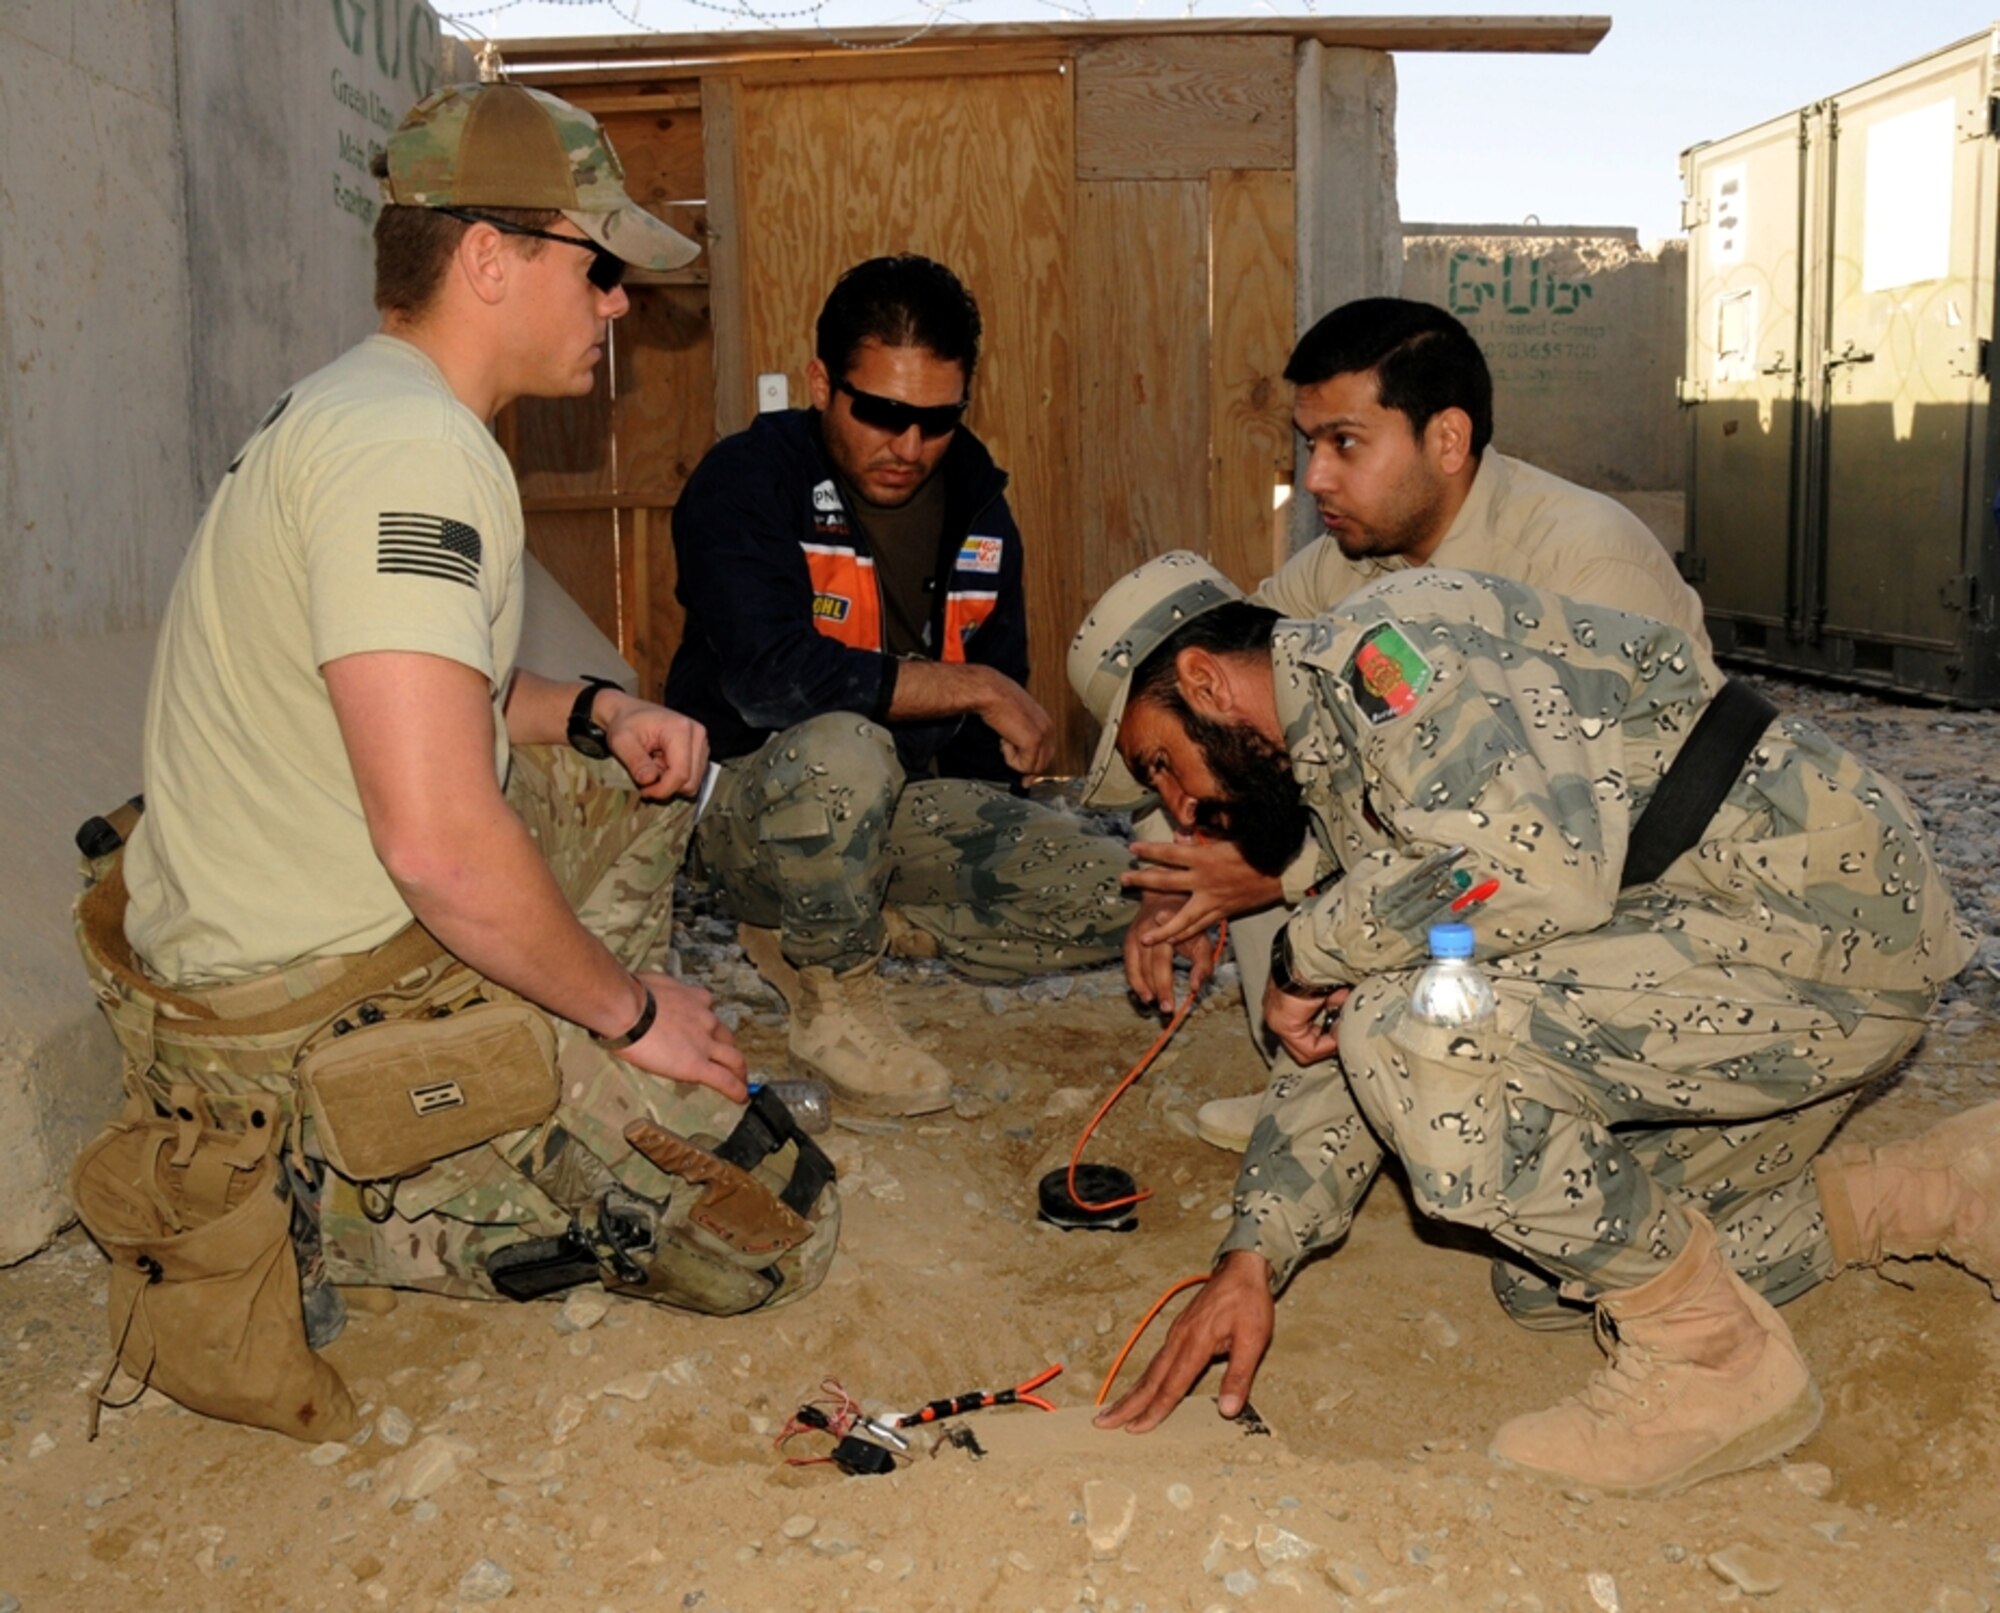 Staff Sgt. Allen P. Middaugh, an explosive ordinance disposal technician with Team 6, 466B Flight, Task Force Paladin discusses the components of an improvised explosive device with Afghan Border Police EOD personnel during a joint training session Feb. 6, 2013, here. The training allowed International Security Assistance Force personnel to validate the ABP EOD certifications. (U.S. Army Photo by Staff Sgt. Shane Hamann, 102nd Mobile Public Affairs Detachment.)